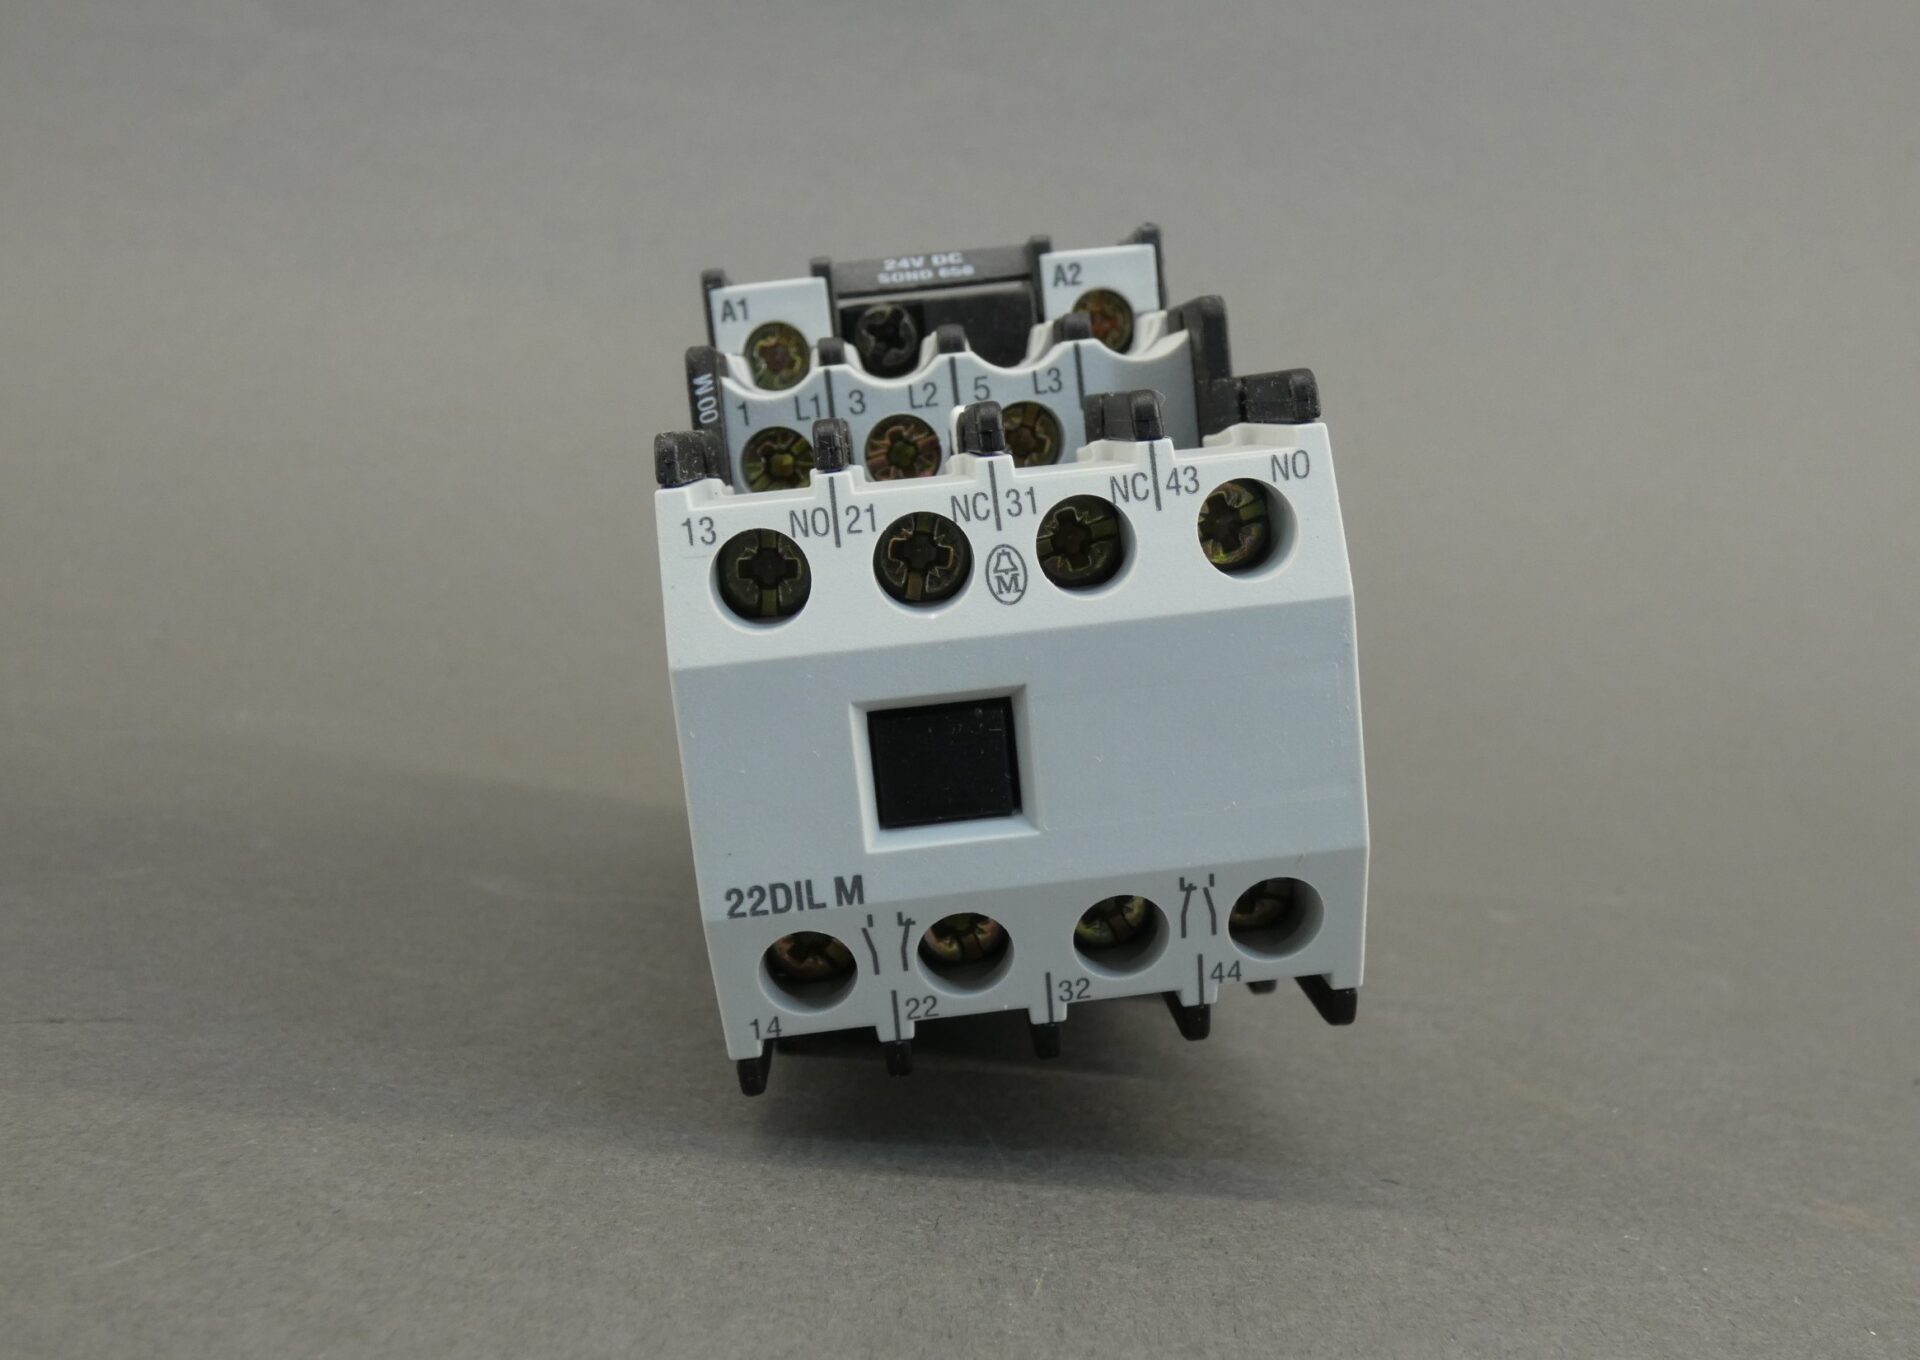 Klockner Moeller Contactor Dil00m-gsond658 With 22dilm AUX Contact Block for sale online 